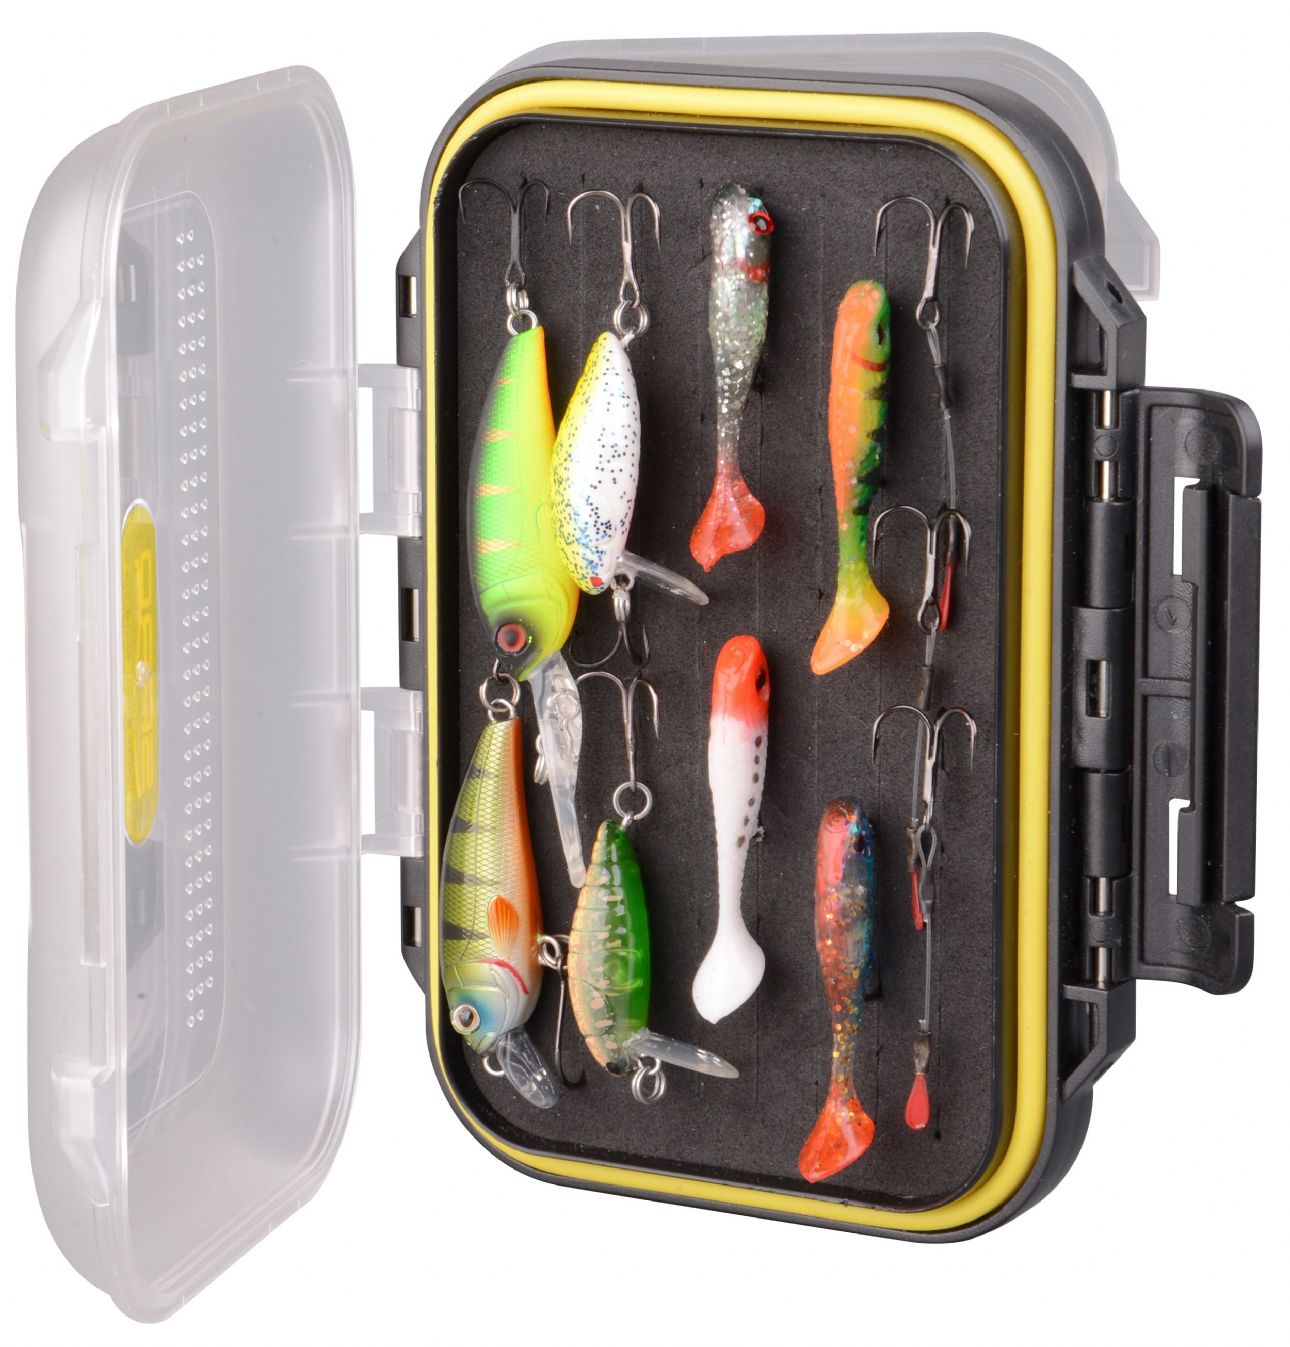 Spro Mobile Stocker Storage Box from